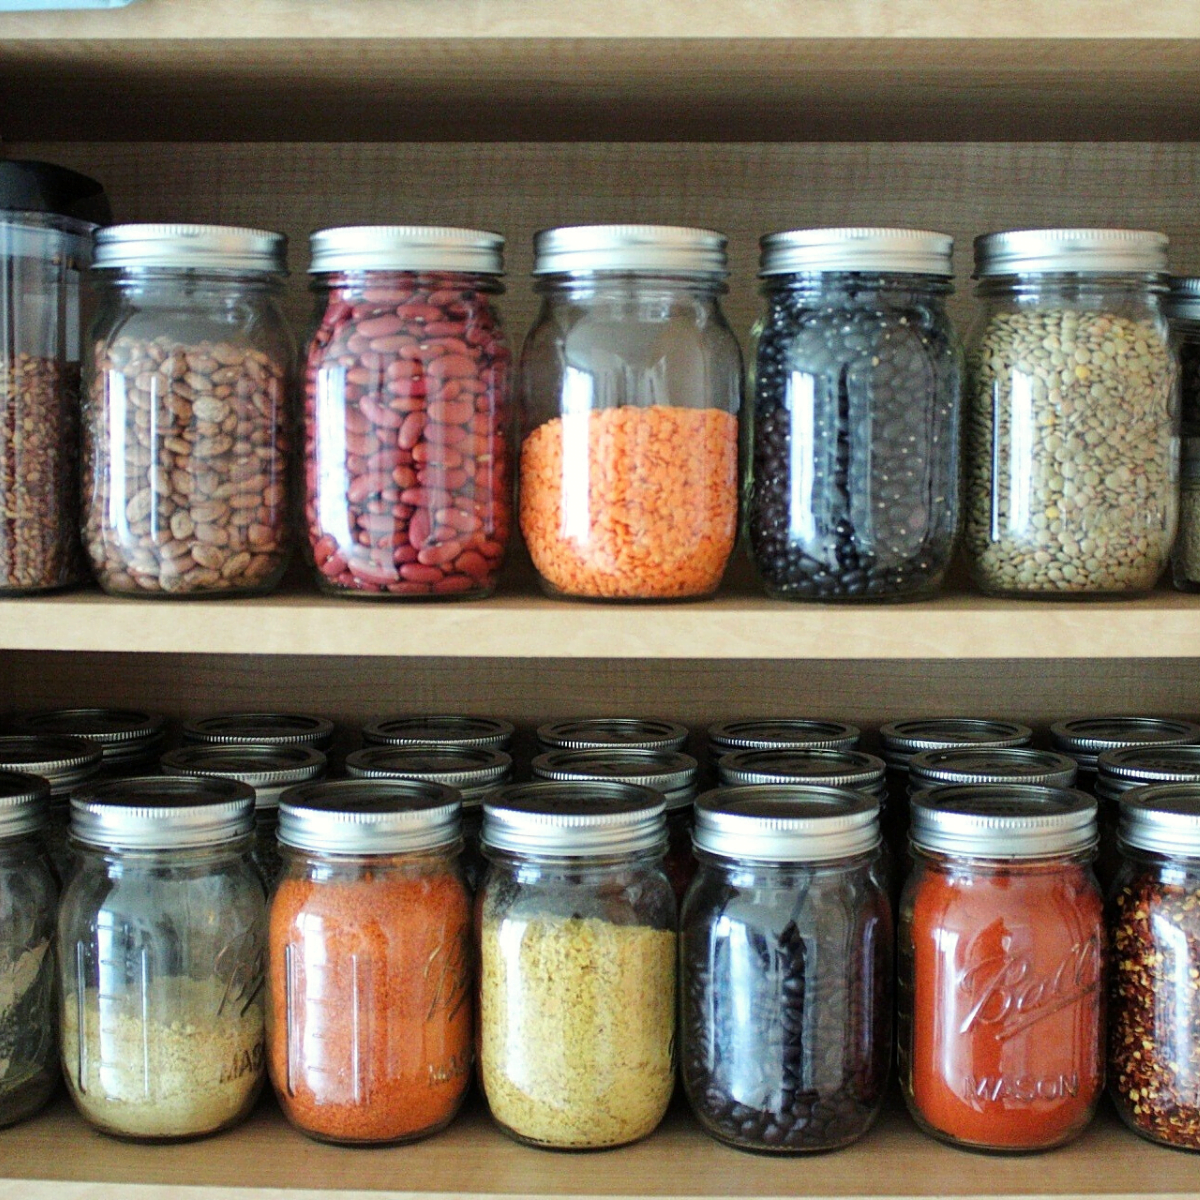 A wooden shelf with neatly arranged glass jars containing a variety of dried goods like beans, lentils, grains, and spices. The jars are well-organized, sealed with lids, and give the impression of a tidy pantry or kitchen storage setup.